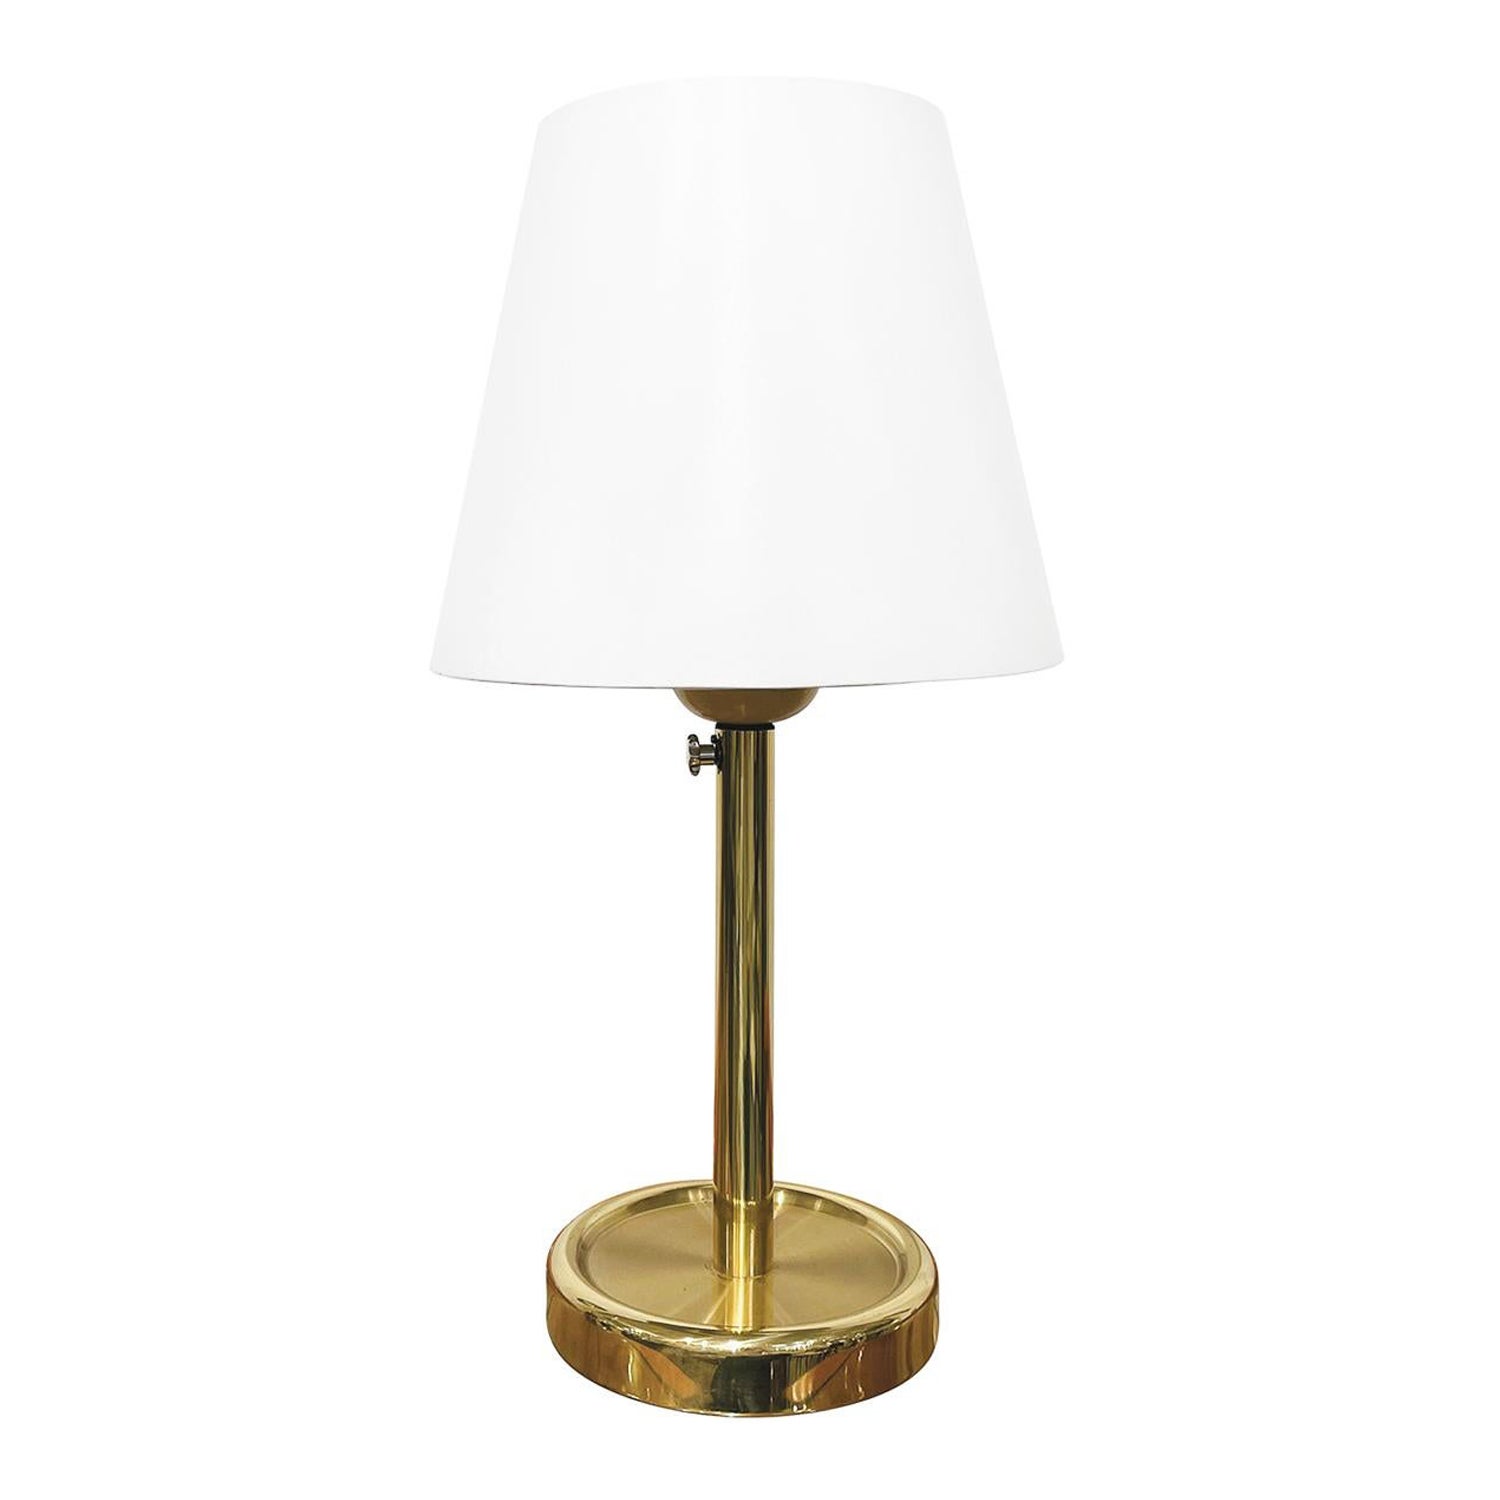 20th Century Swedish Polished Brass Lamp - Desk Light by Fagerhults Belysning